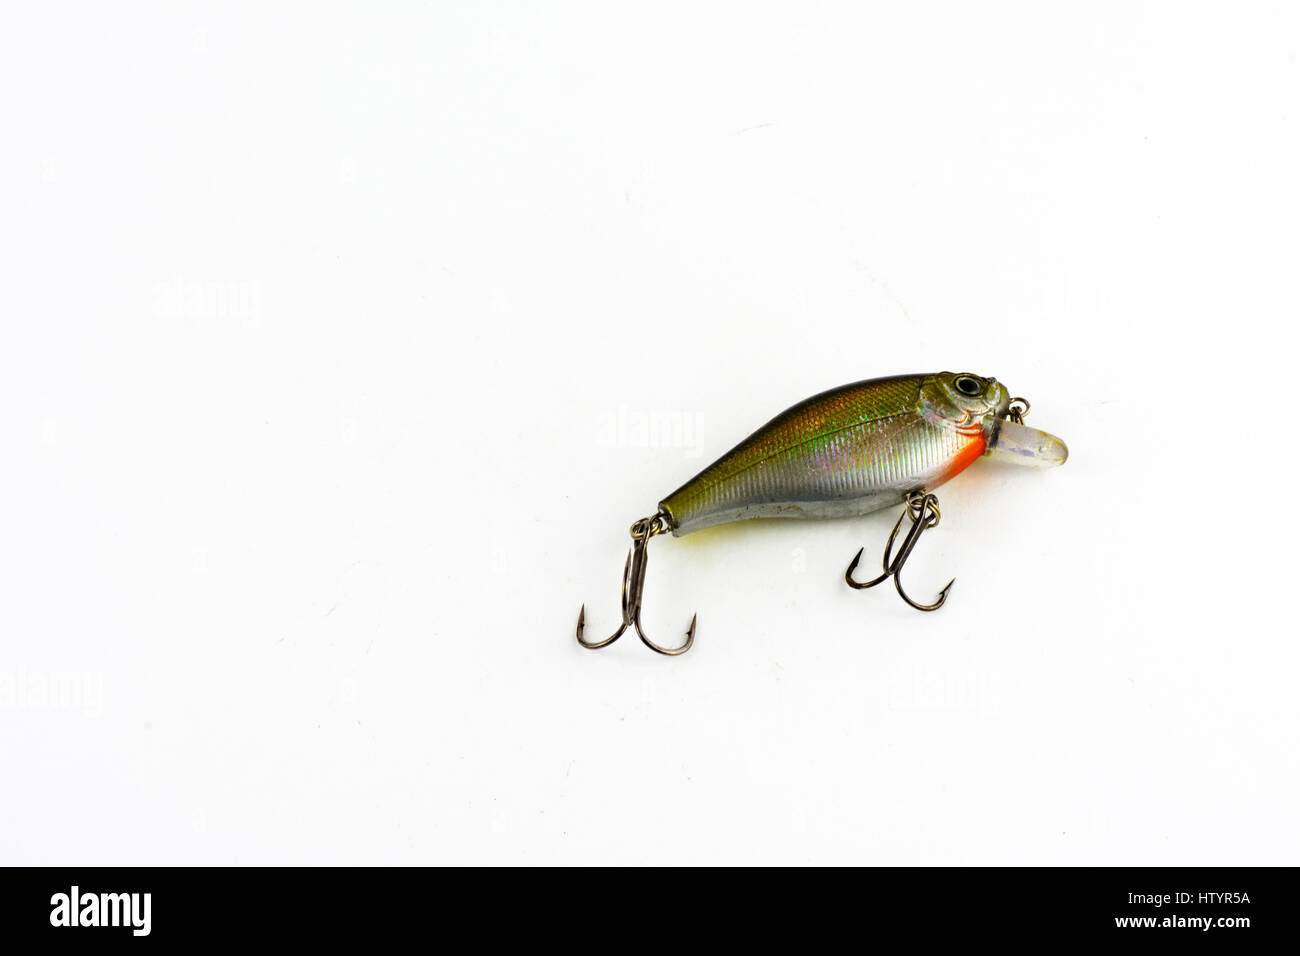 Set of metal lures for fishing shot on white surface Stock Photo - Alamy